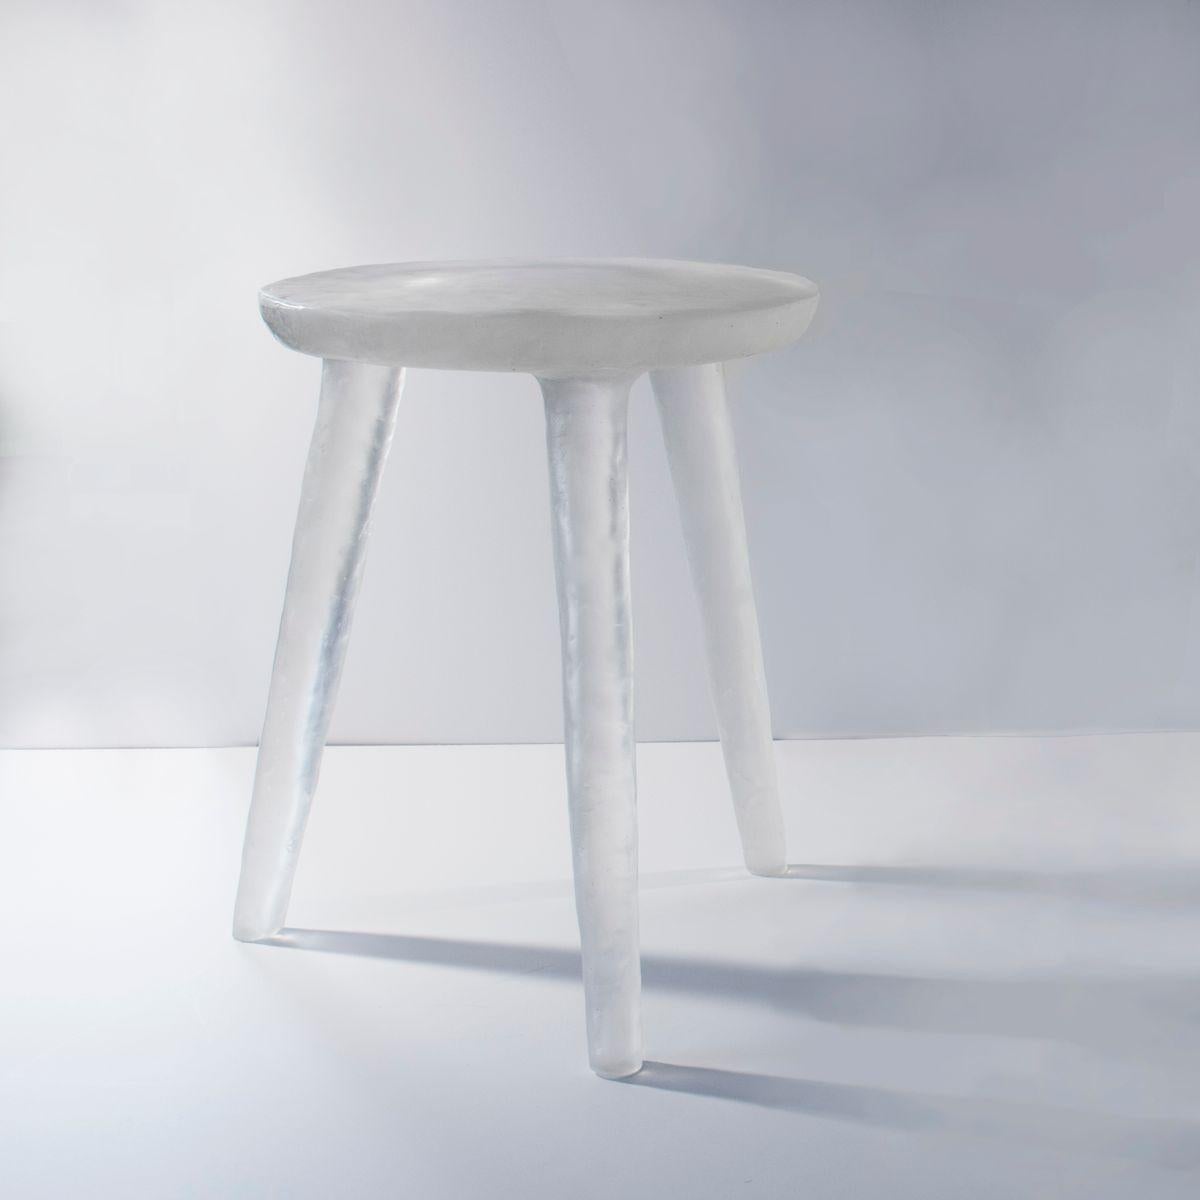 Glow Side Table or Stool 'Periwinkle Purple /Aqua Blue' in Recycled Plastic In New Condition For Sale In West Hollywood, CA